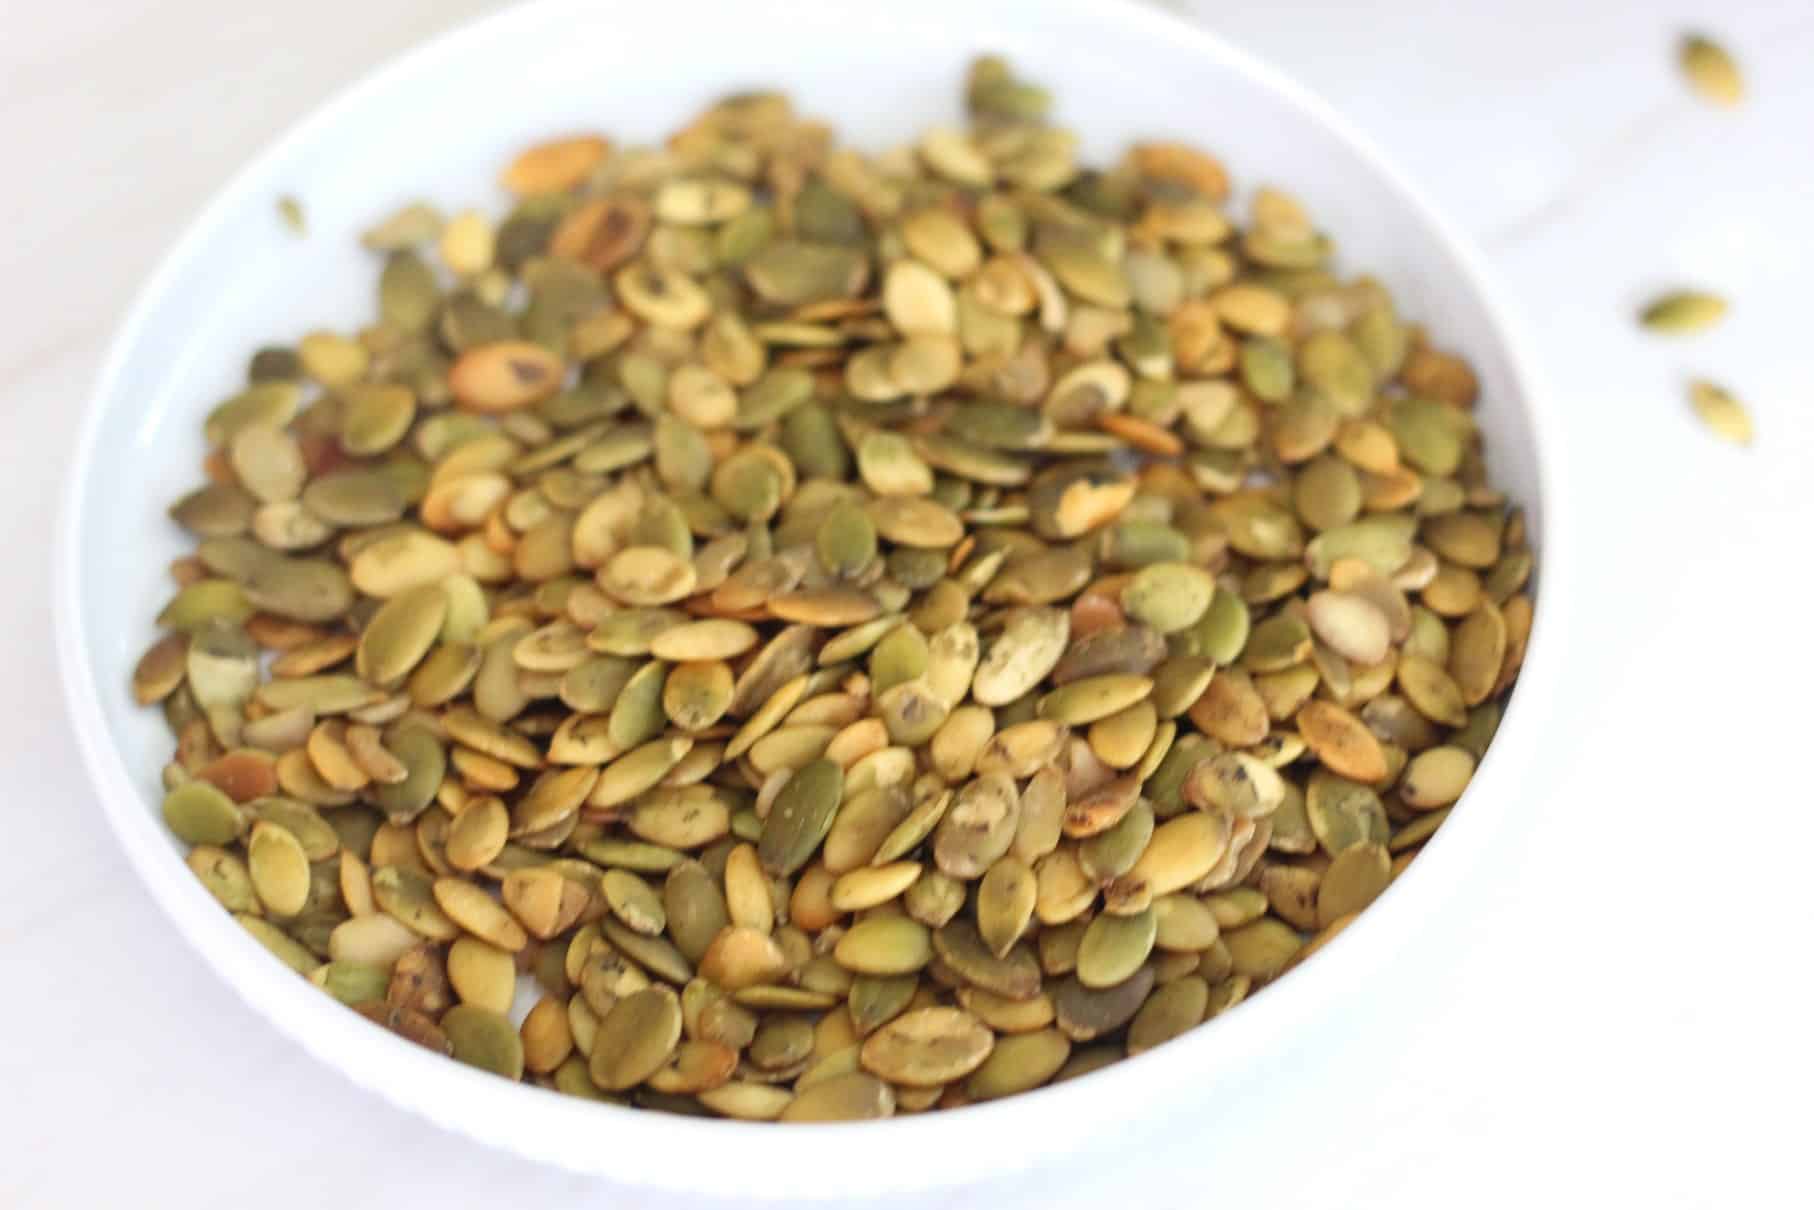 Pumpkin seeds or pepitas on a round plate. These seeds are used as a topping for the soup.